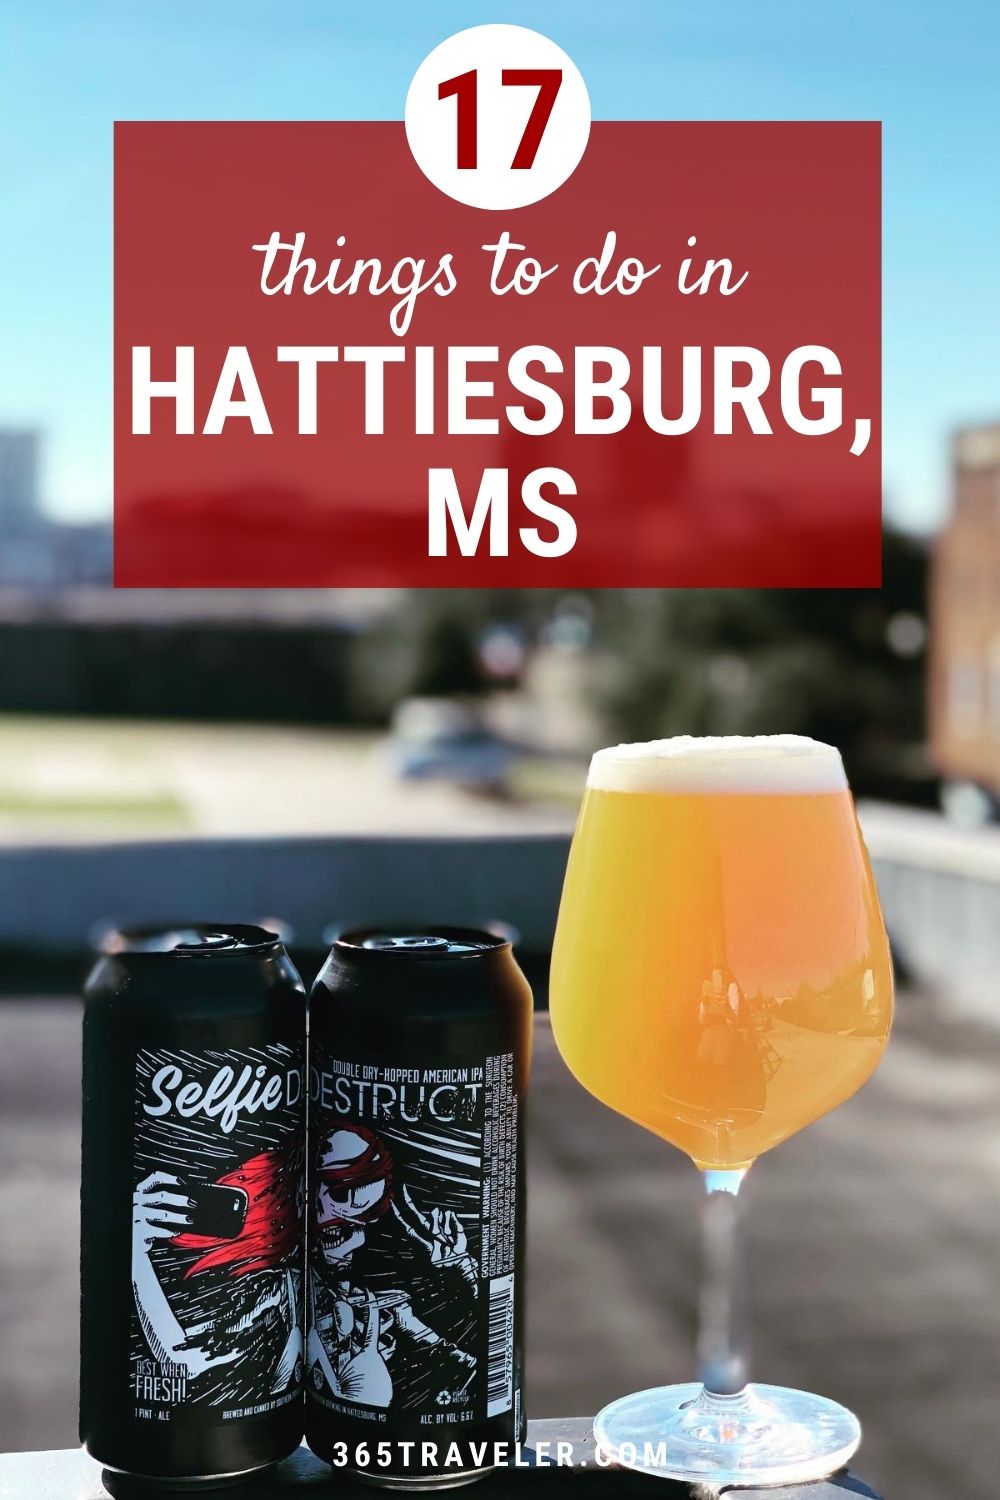 17 Things To Do in Hattiesburg Ms You’ll Love